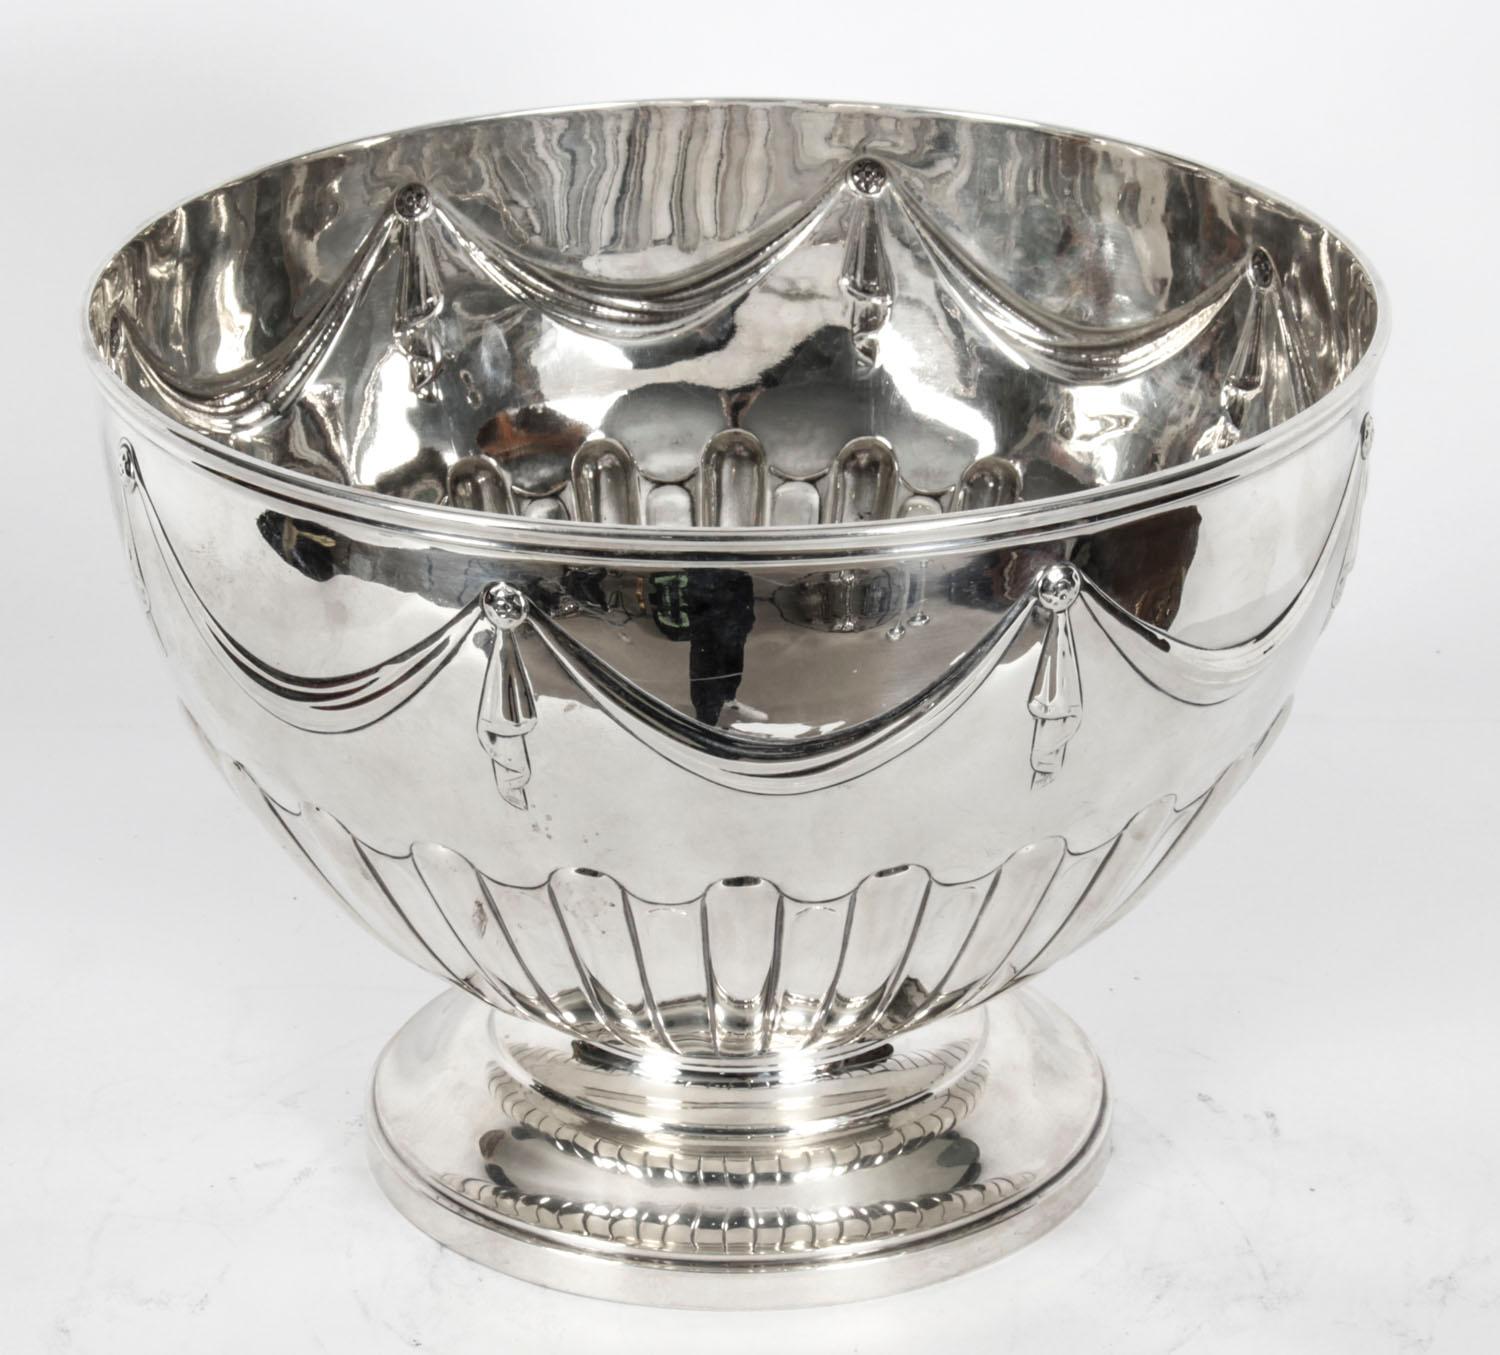 This is a gorgeous antique sterling silver punch bowl with hallmarks for London 1884 and the makers mark of the renowned silversmith family, Walter & John Barnard.
 
This exquisite punch bowl is also ideal as a champagne cooler and it has